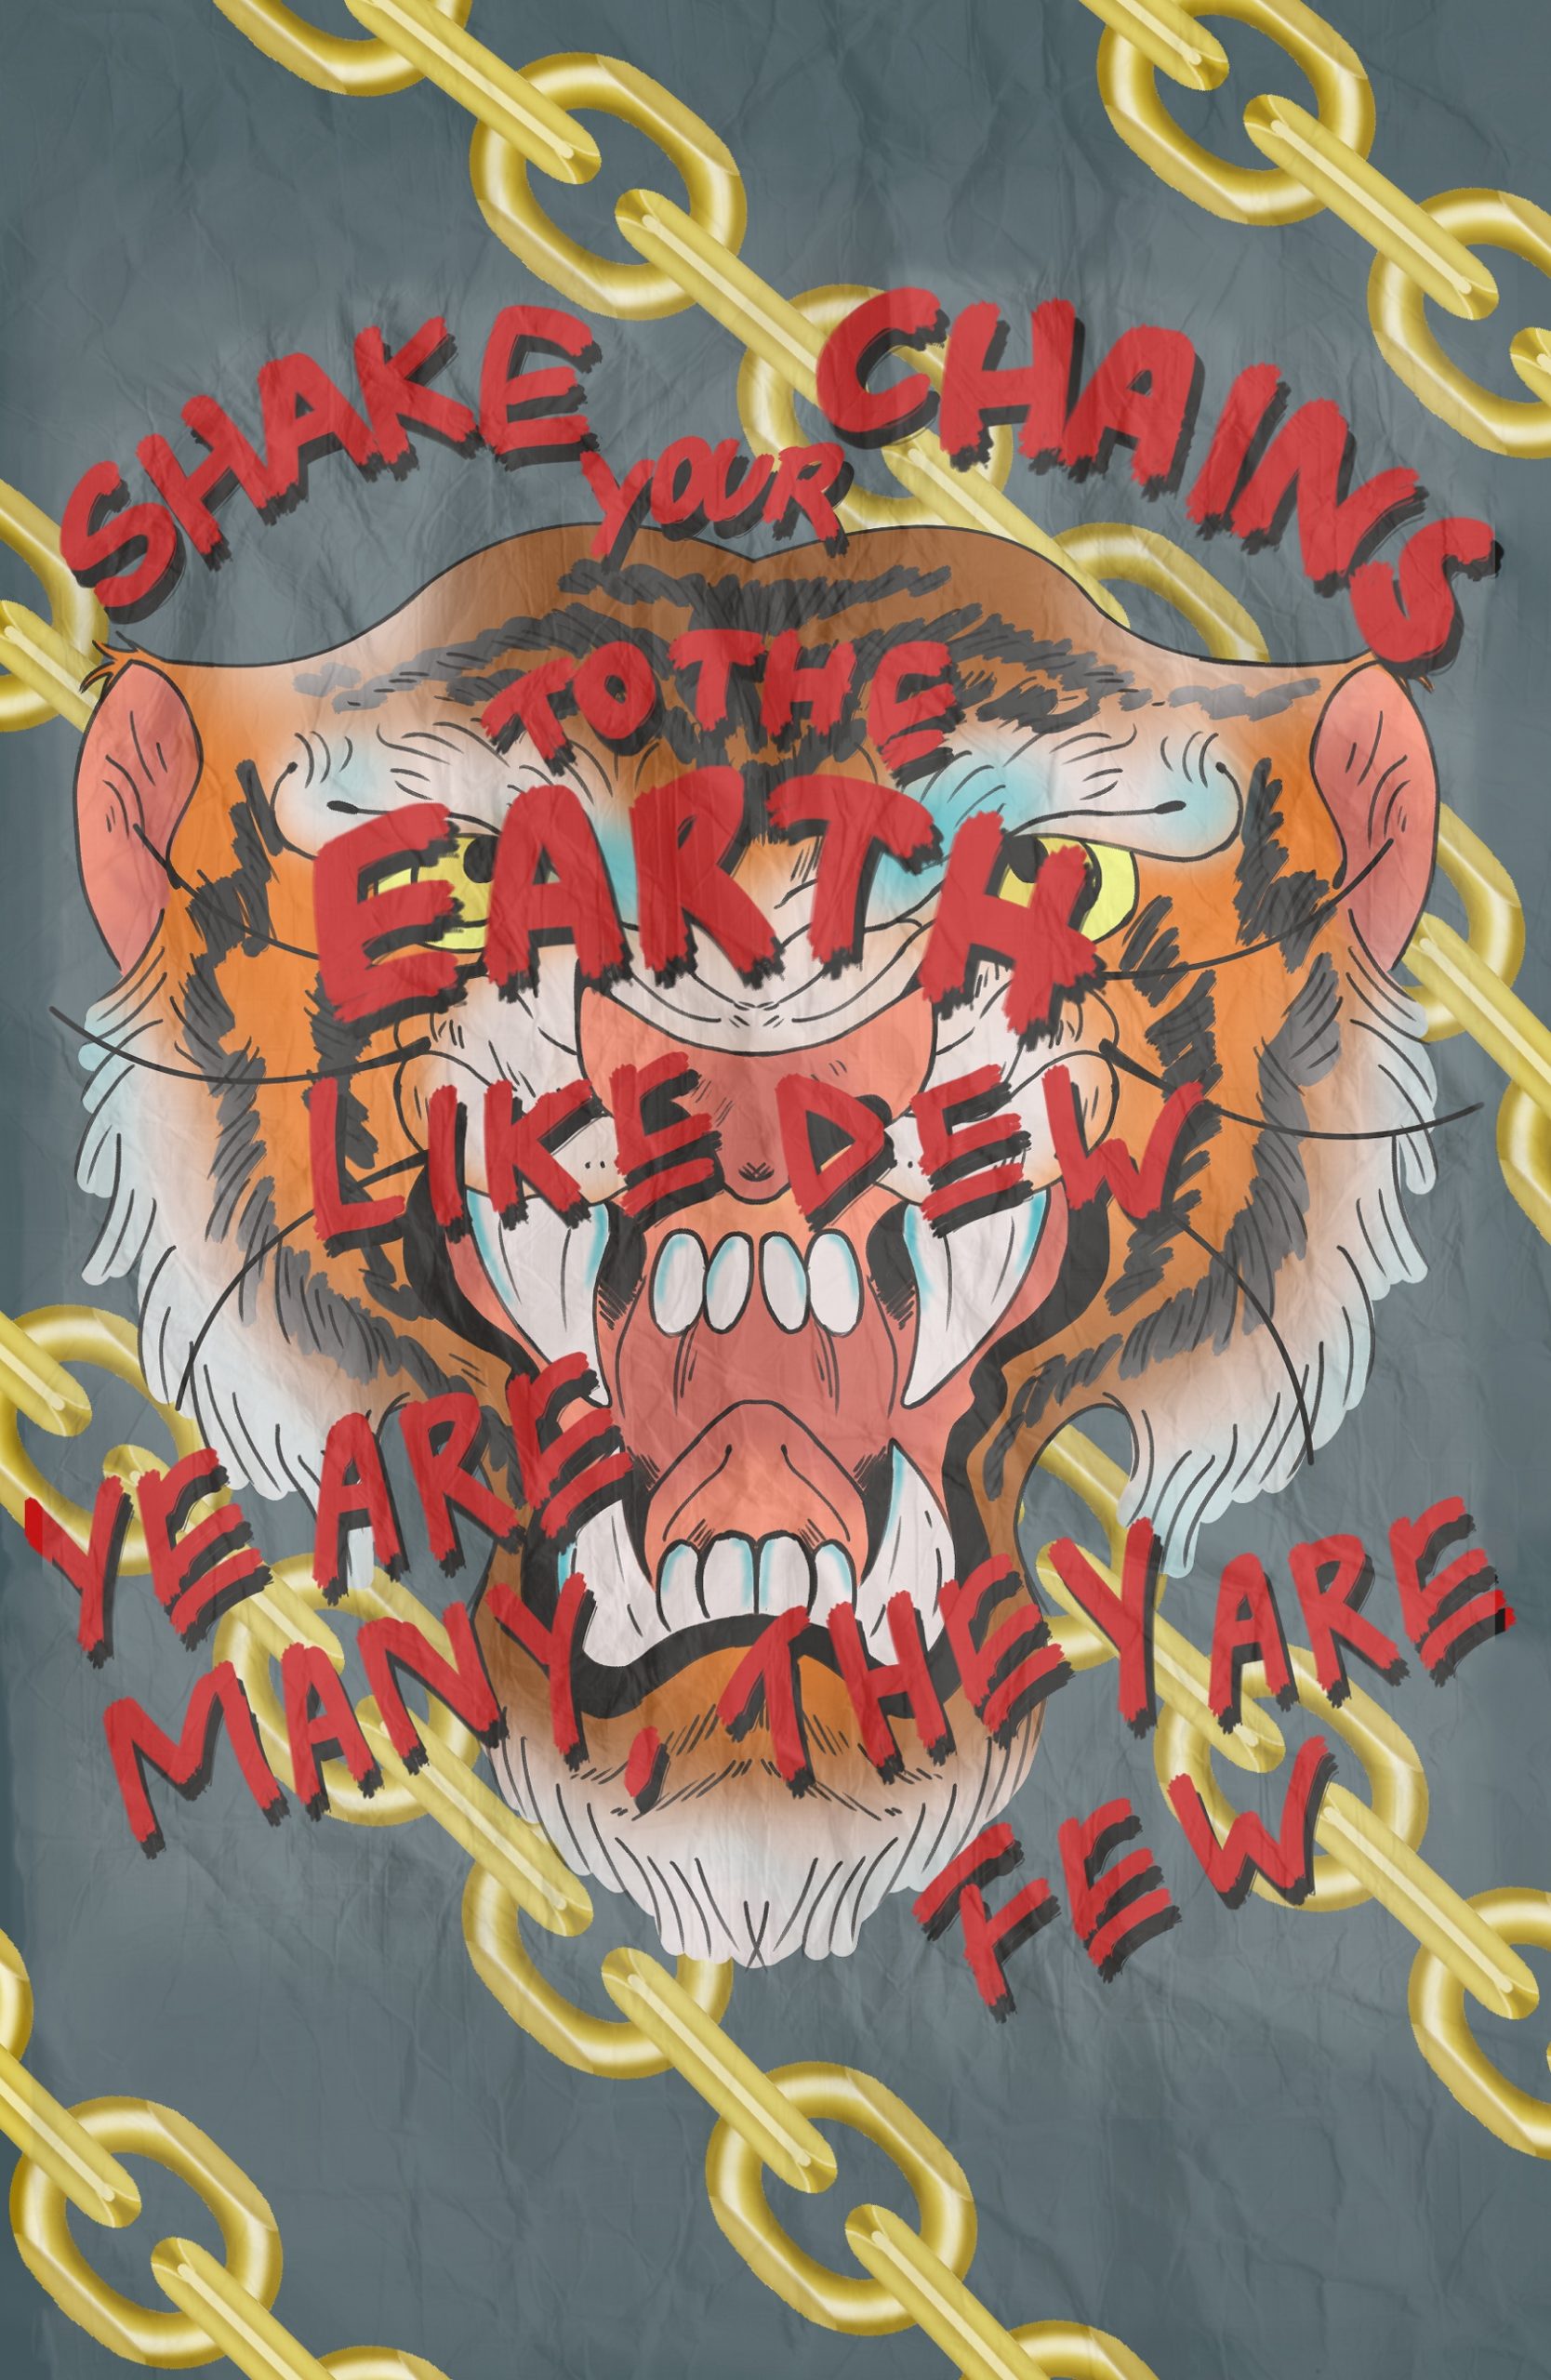 digital illustration of a tiger roaring and bearing its teeth against a textured gray background interspersed with yellow chains. Written in red text across the illustration is “SHAKE YOUR CHAINS TO THE EARTH LIKE DEW YE ARE MANY, THEY ARE FEW”.]